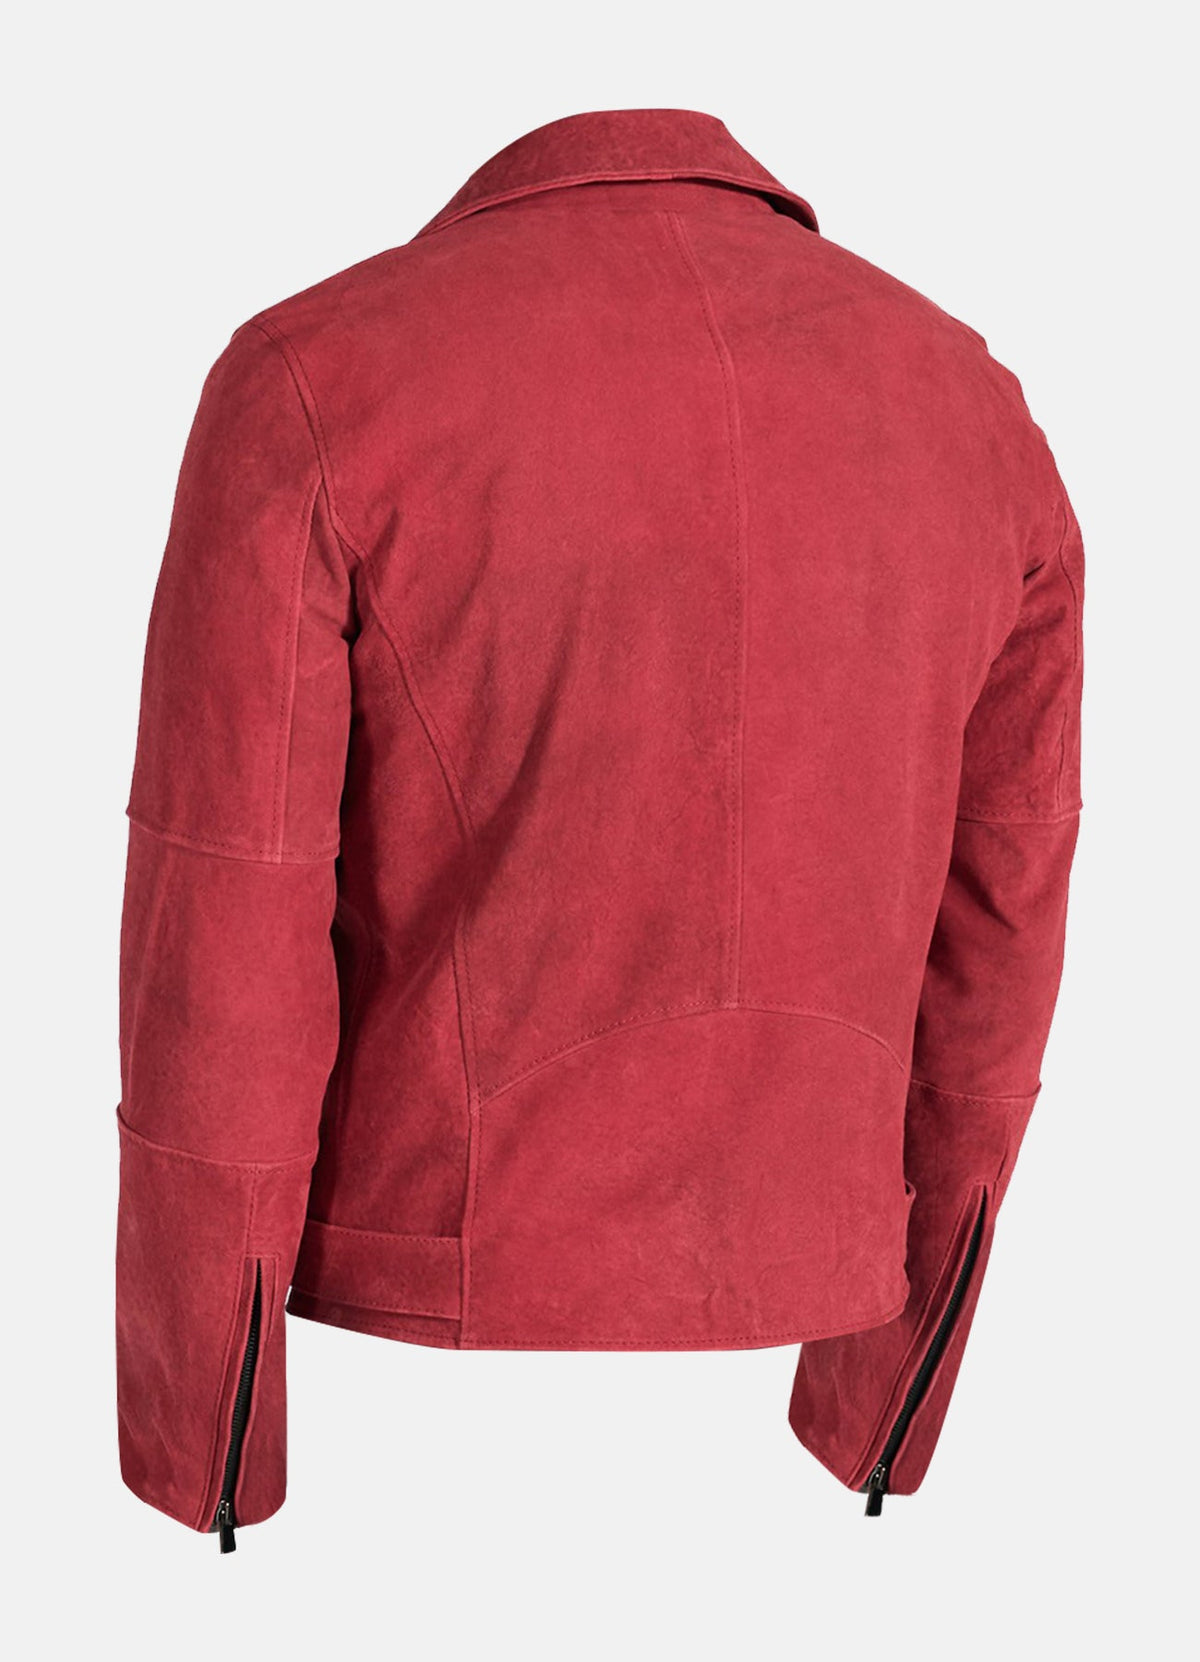 Mens Bright Red Suede Leather Jacket